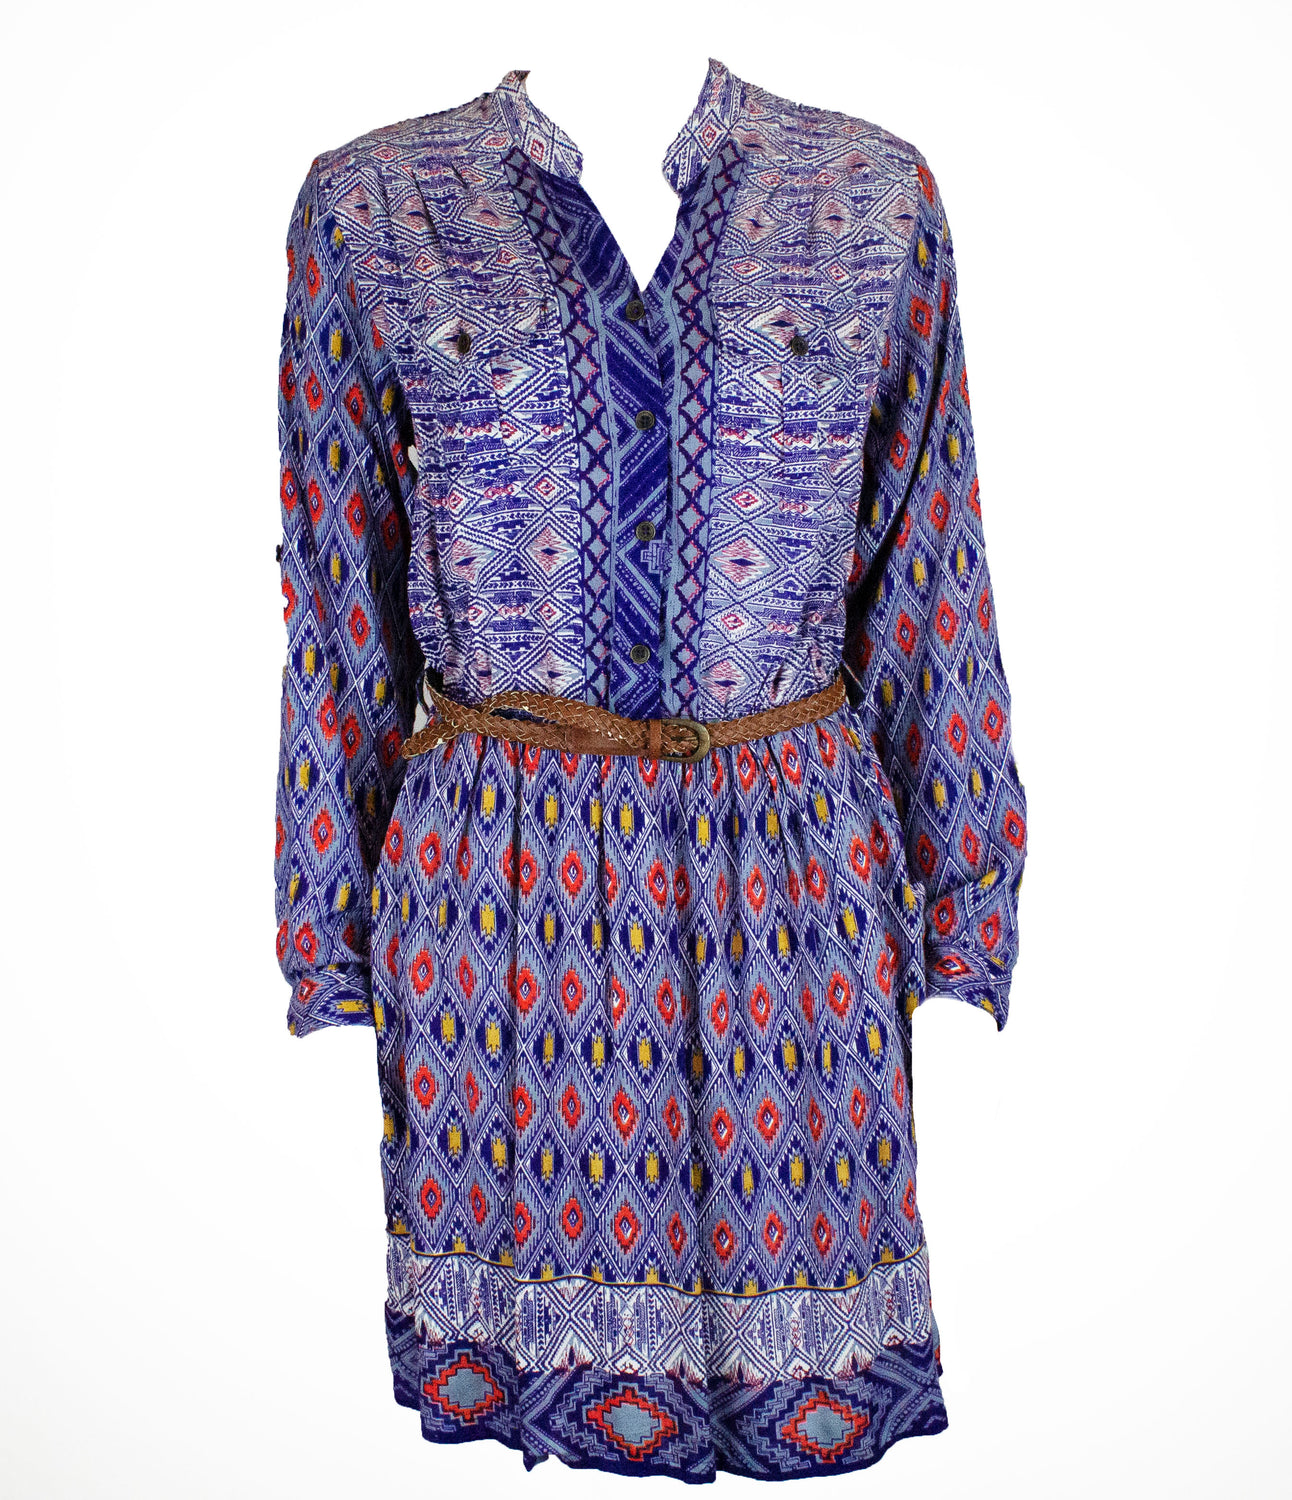 long sleeved baby doll top with geometric design pattern in blue white indigo and orange paired with a brown woven belt